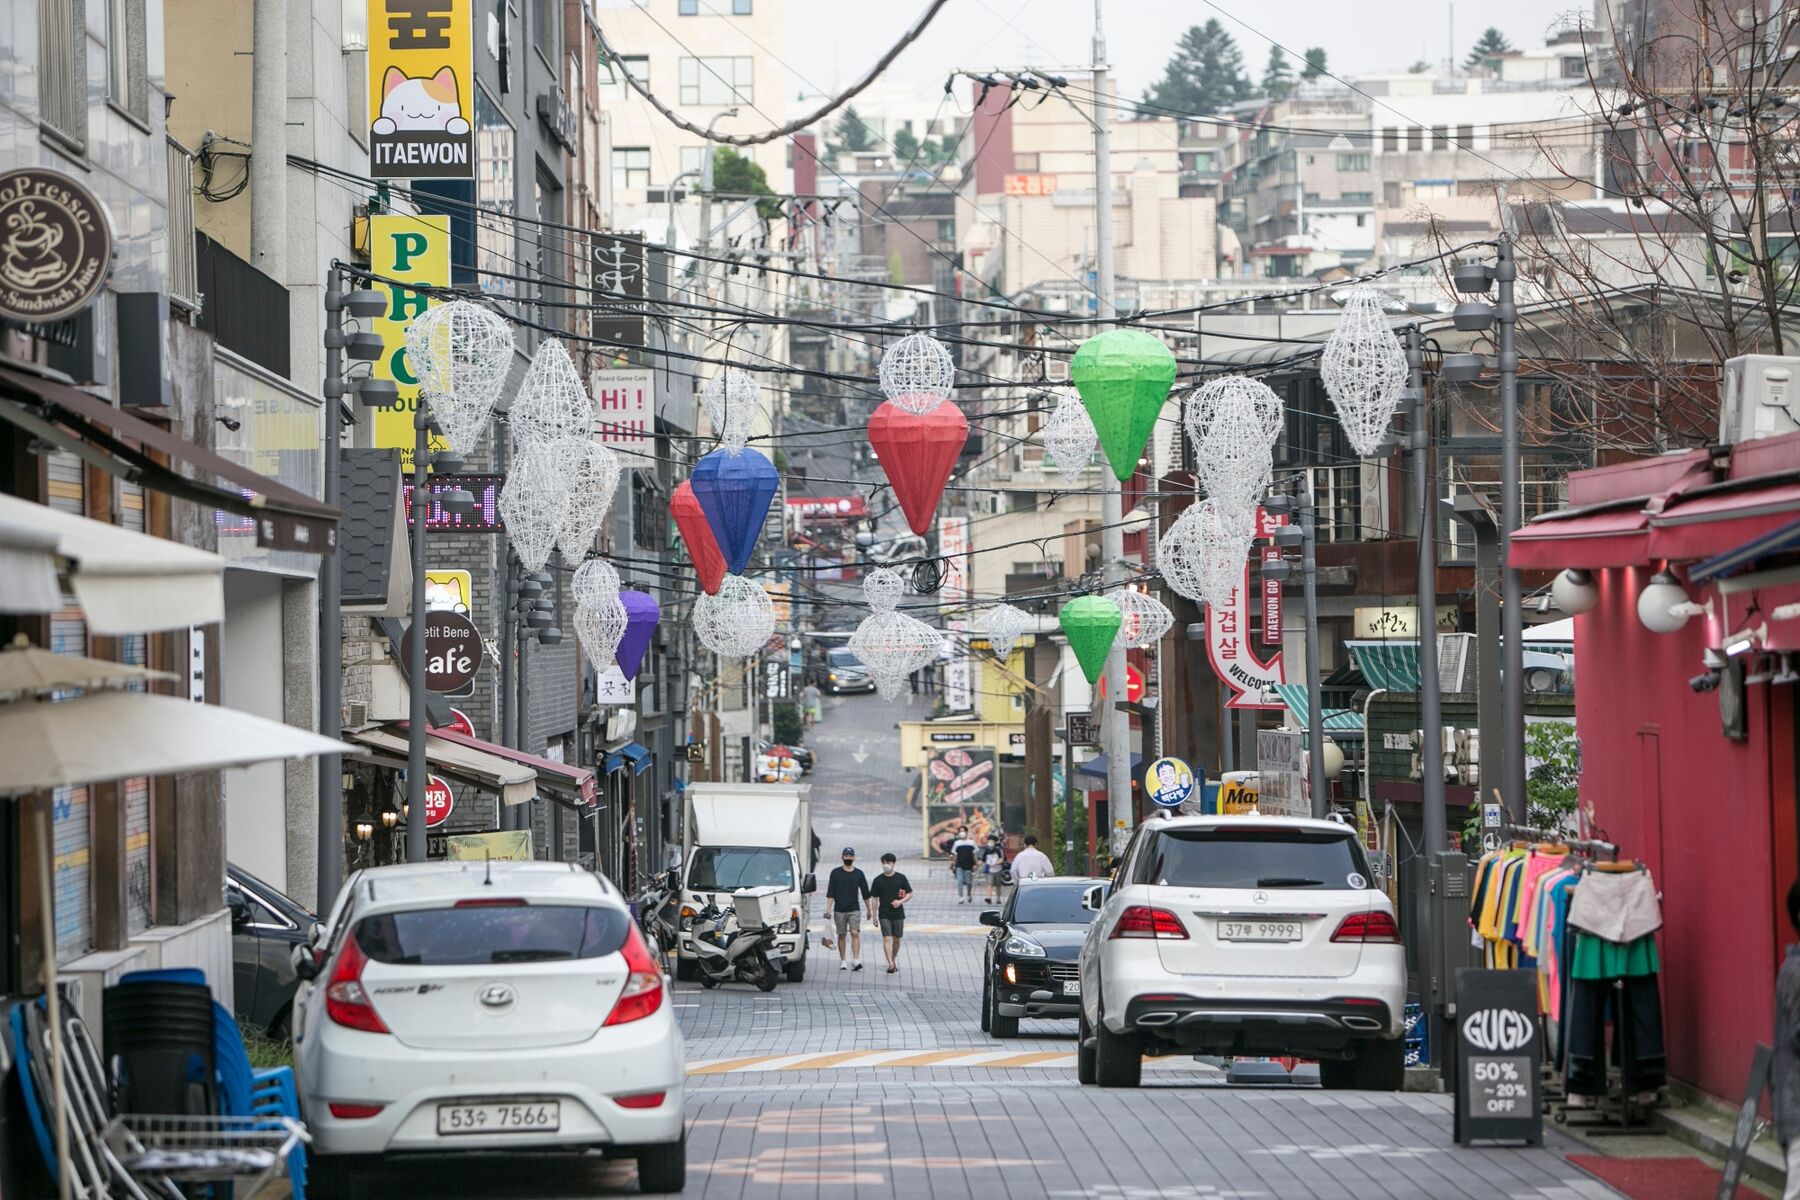 Pedestrians wearing protective face masks walk through an empty street in the Itaewon district of Seoul, South Korea, on Friday, Aug. 21, 2020. 